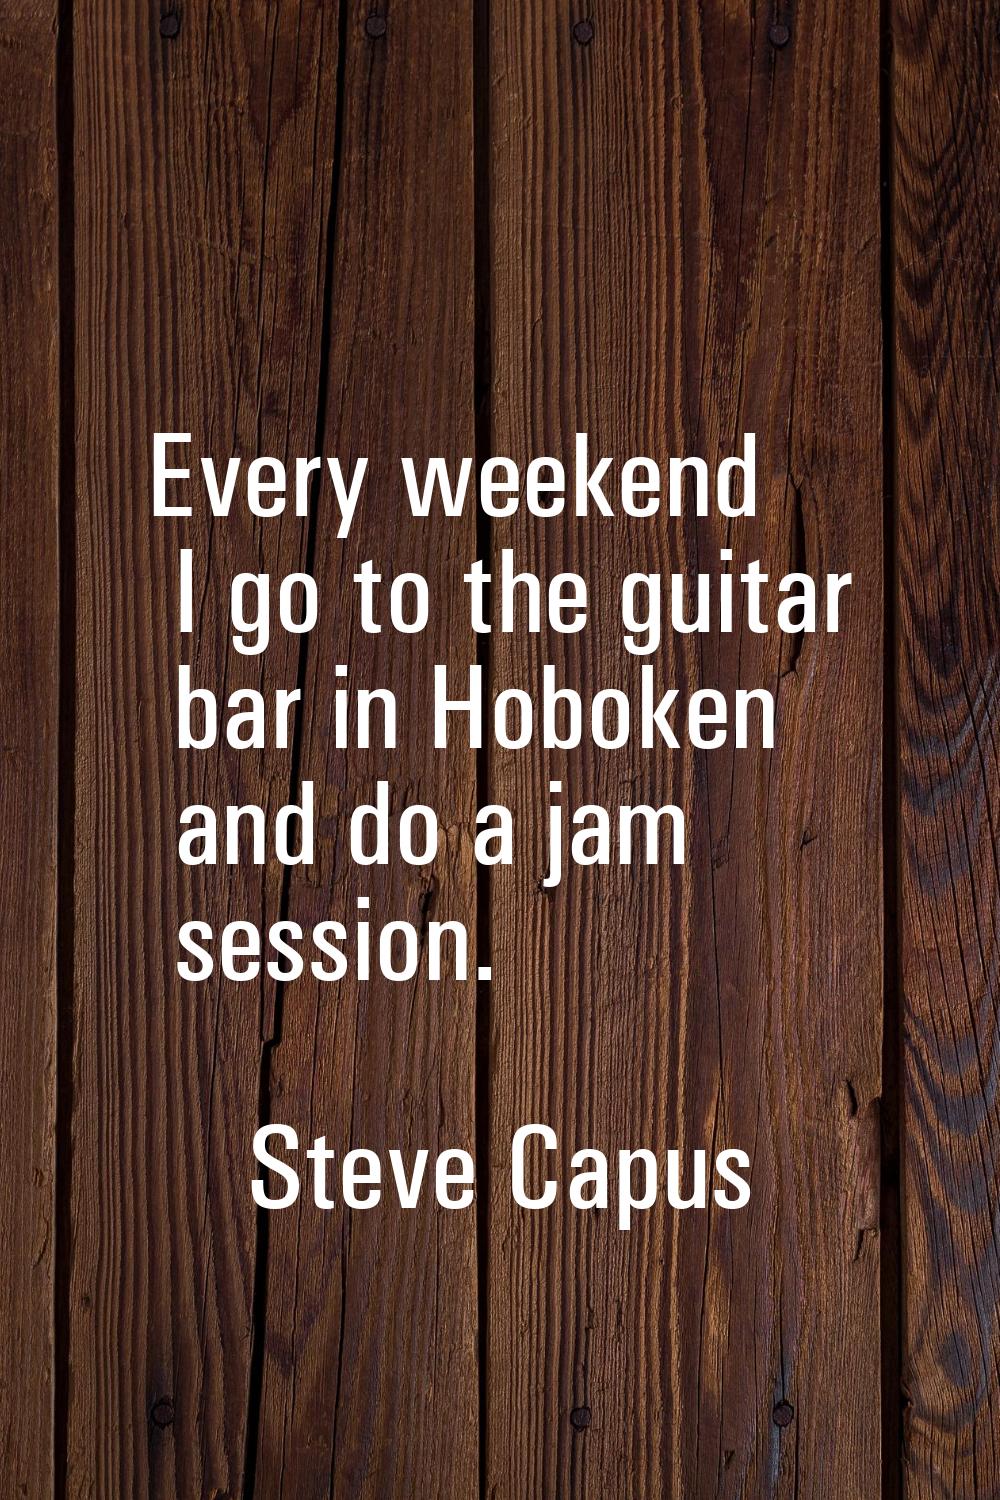 Every weekend I go to the guitar bar in Hoboken and do a jam session.